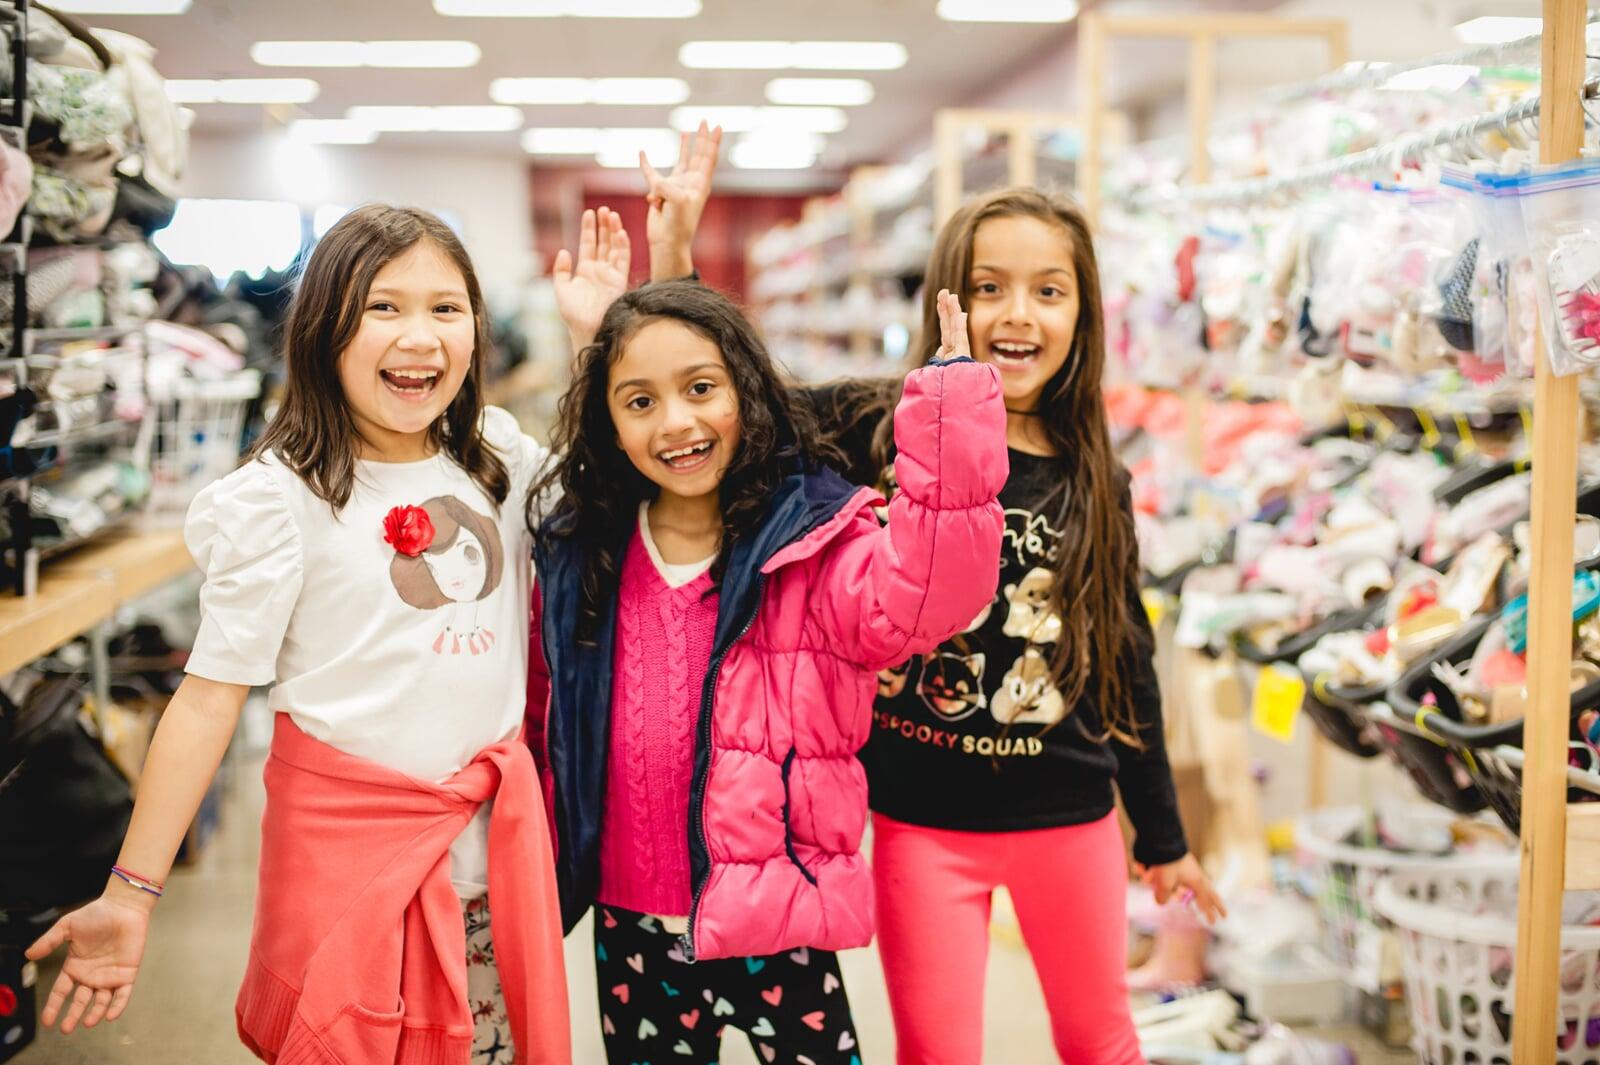 Three school aged girls smiling and holding hands in the air as they shop for shoes.